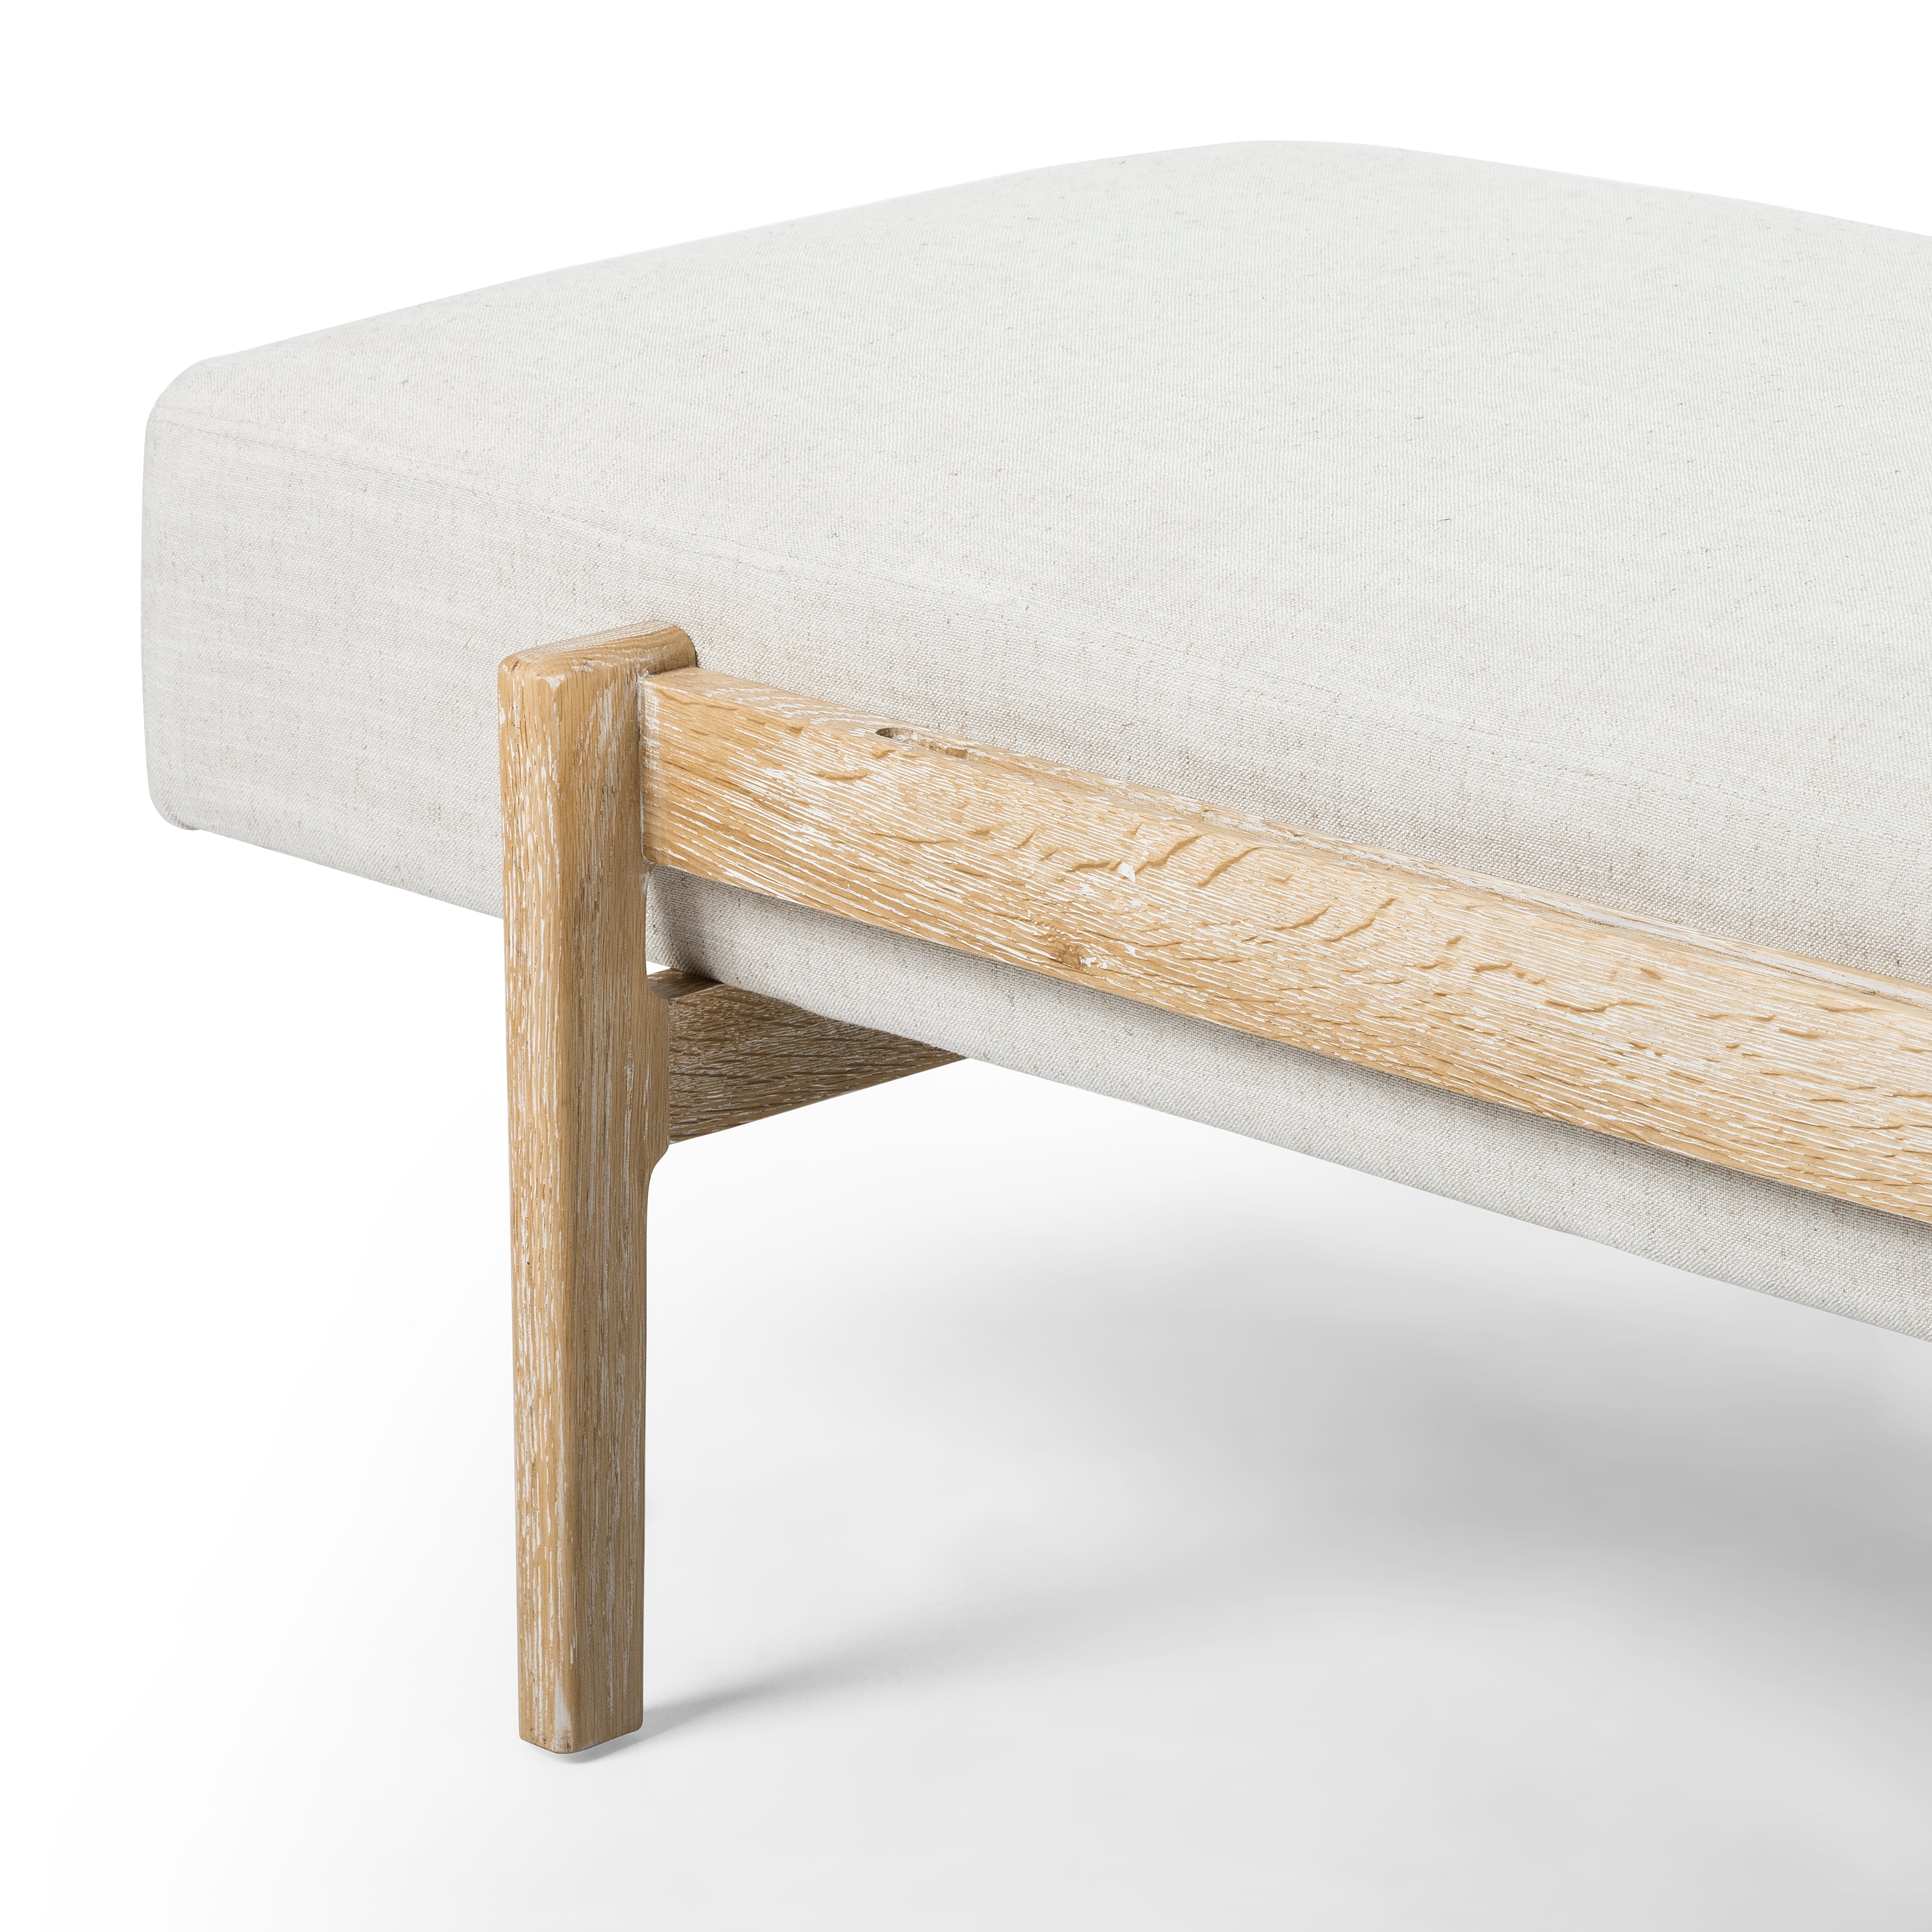 Savoy Parchment Fabric with Vintage White Wash Oak | Fawkes Bench | Valley Ridge Furniture